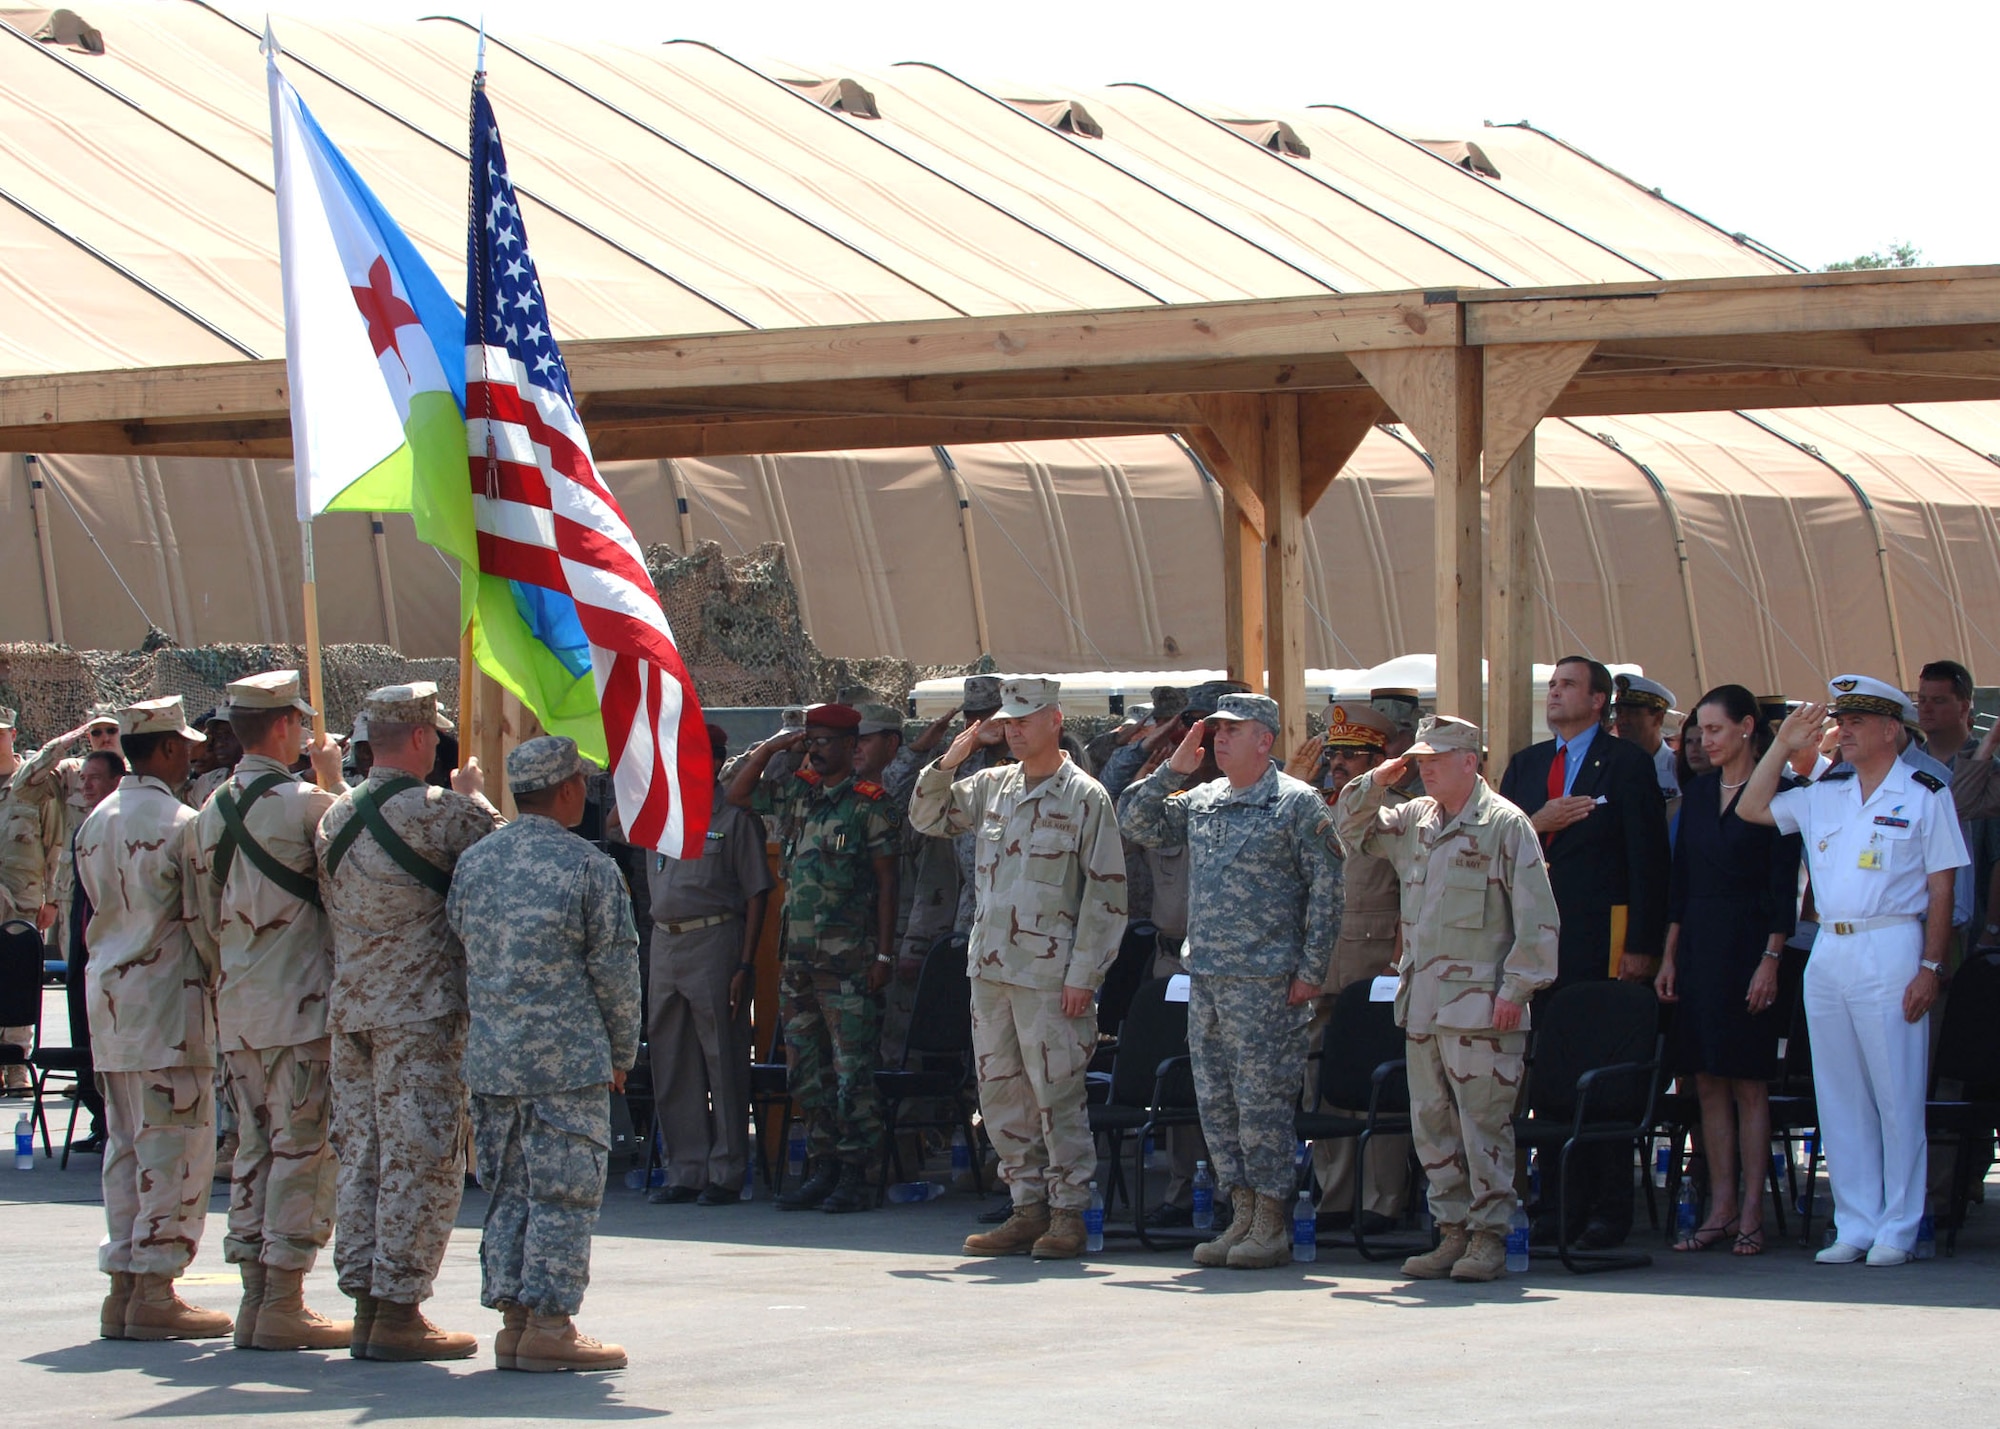 Rear Adm. Richard Hunt (from left), Army Gen. John Abizaid and Rear Adm. James Hart salute the colors during the Combined Joint Task Force - Horn of Africa change-of-command ceremony Feb. 14 at Camp Lemonier, Djibouti.  General Abizaid officiated as Admiral Hunt passed command of the task force to Admiral Hart.  (U.S. Air Force photo/Tech. Sgt. Carrie Bernard)